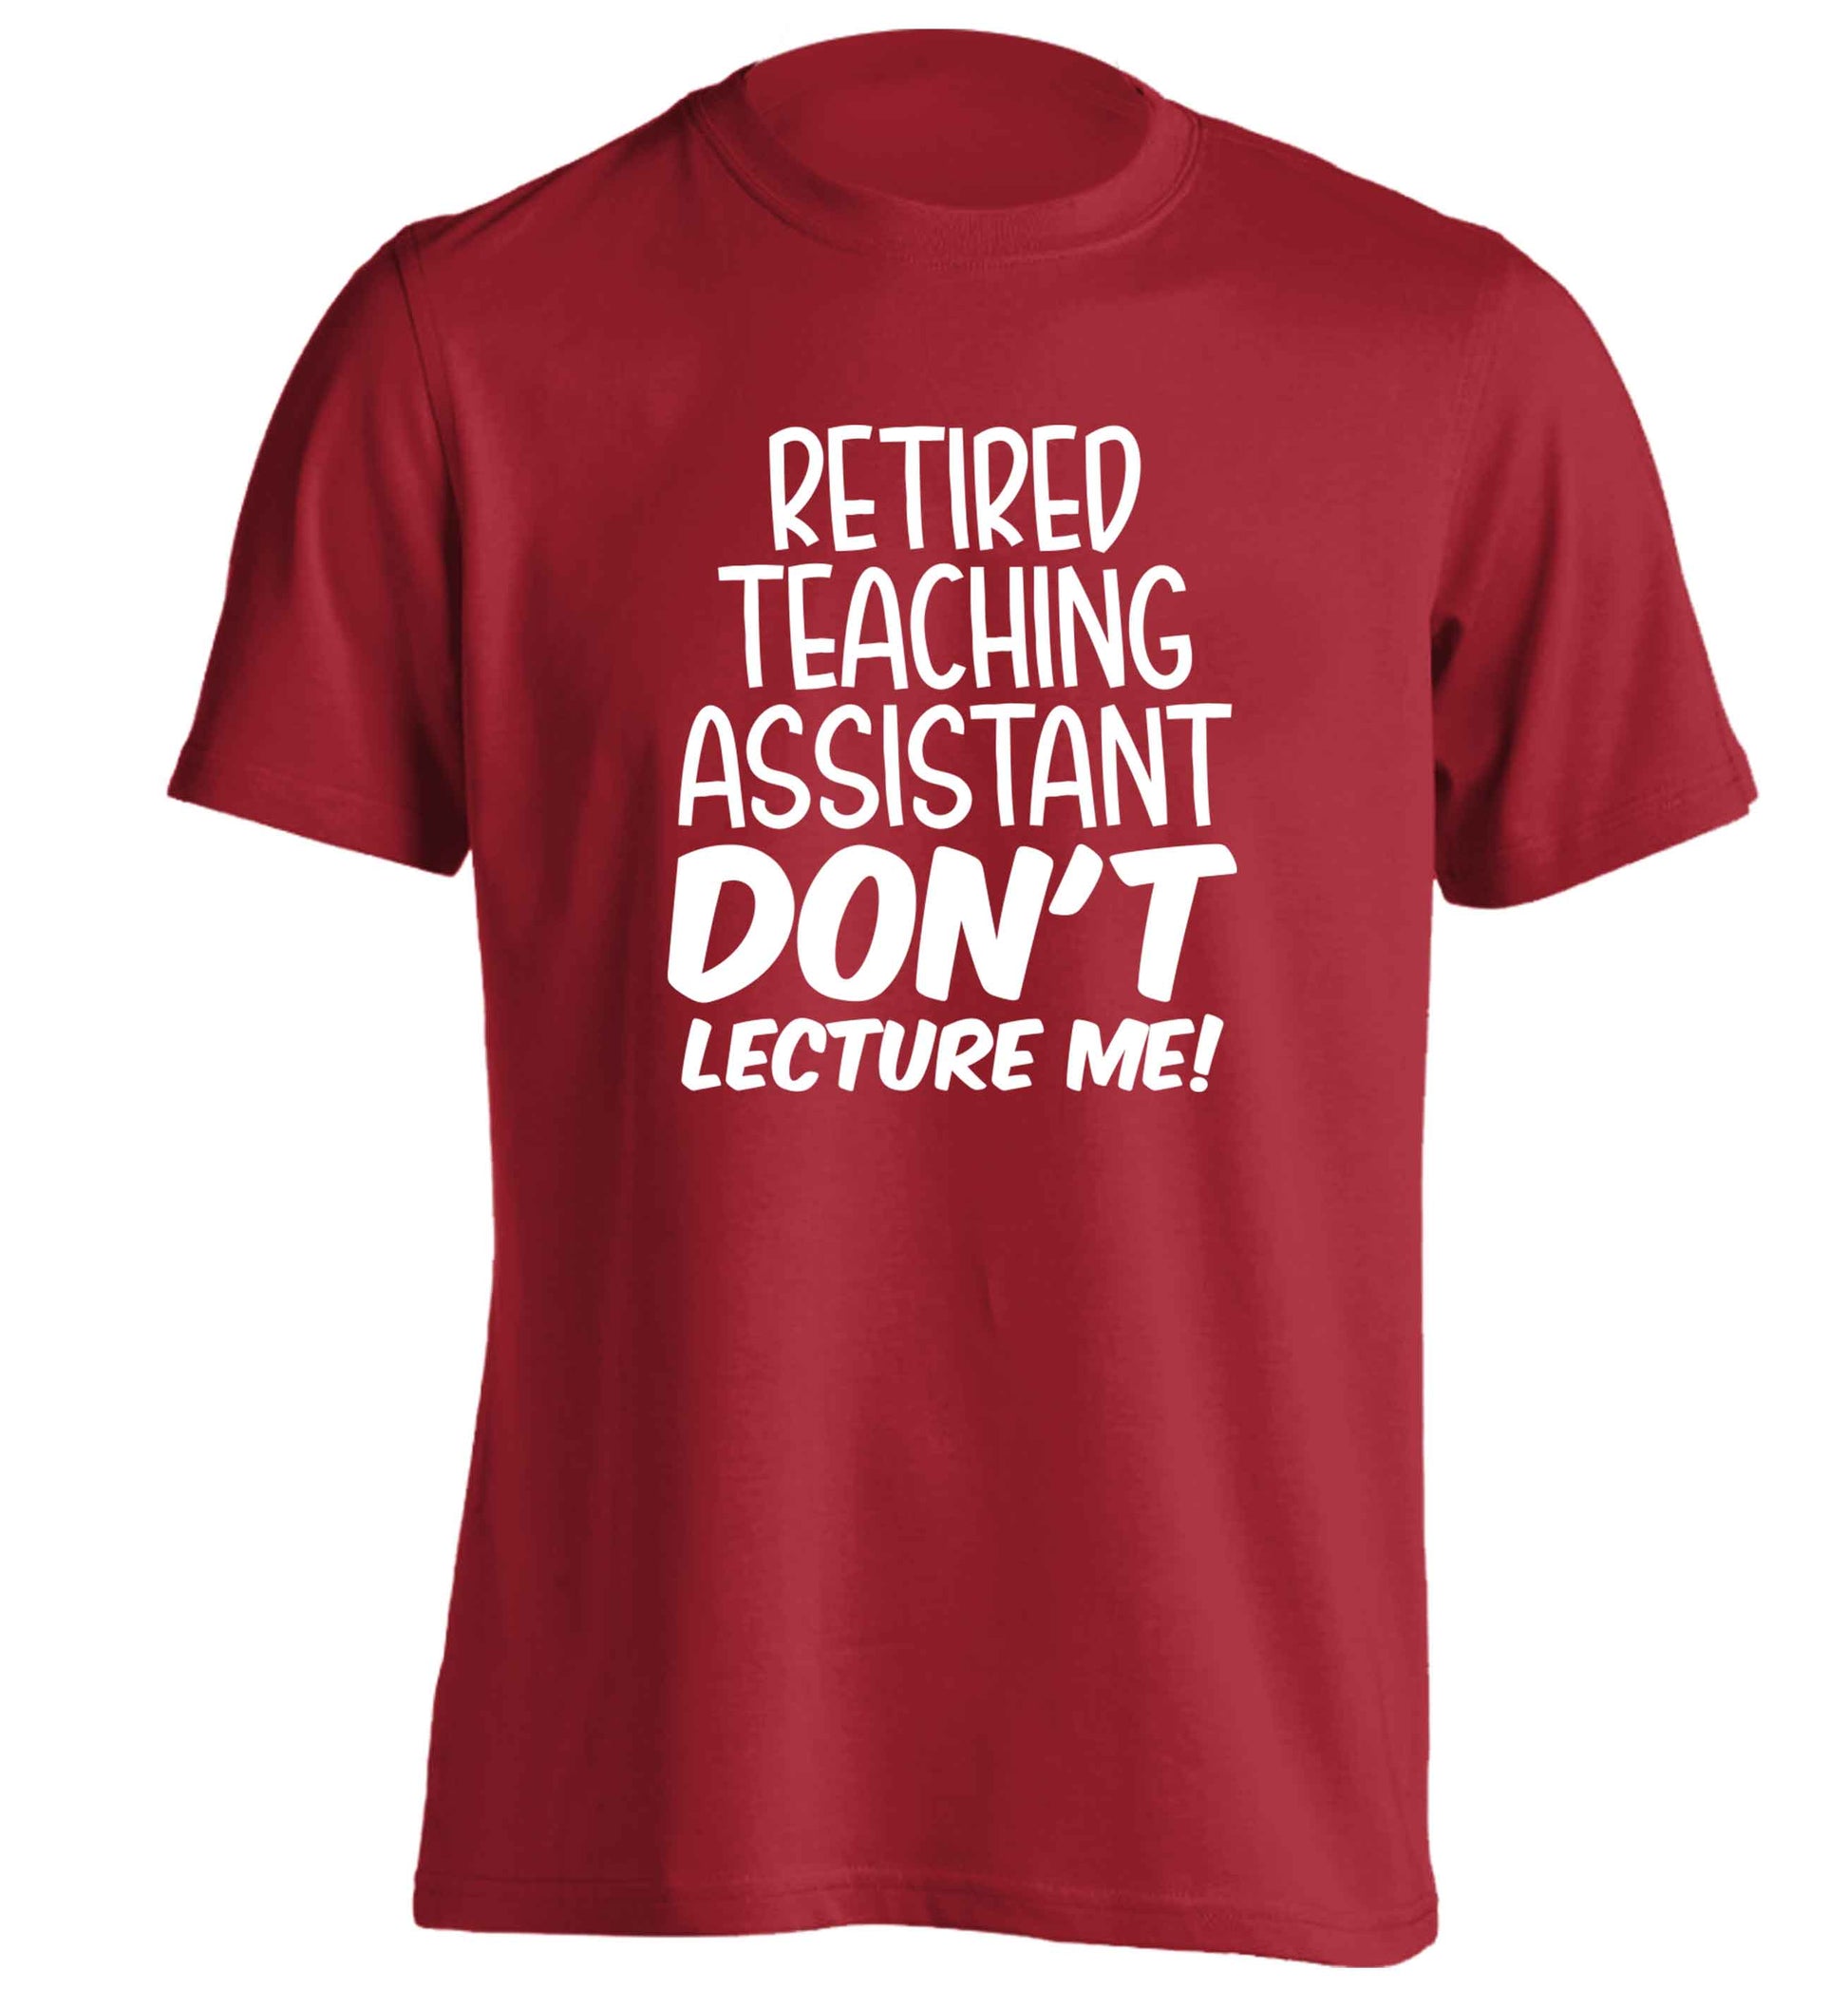 Retired teaching assistant don't lecture me adults unisex red Tshirt 2XL